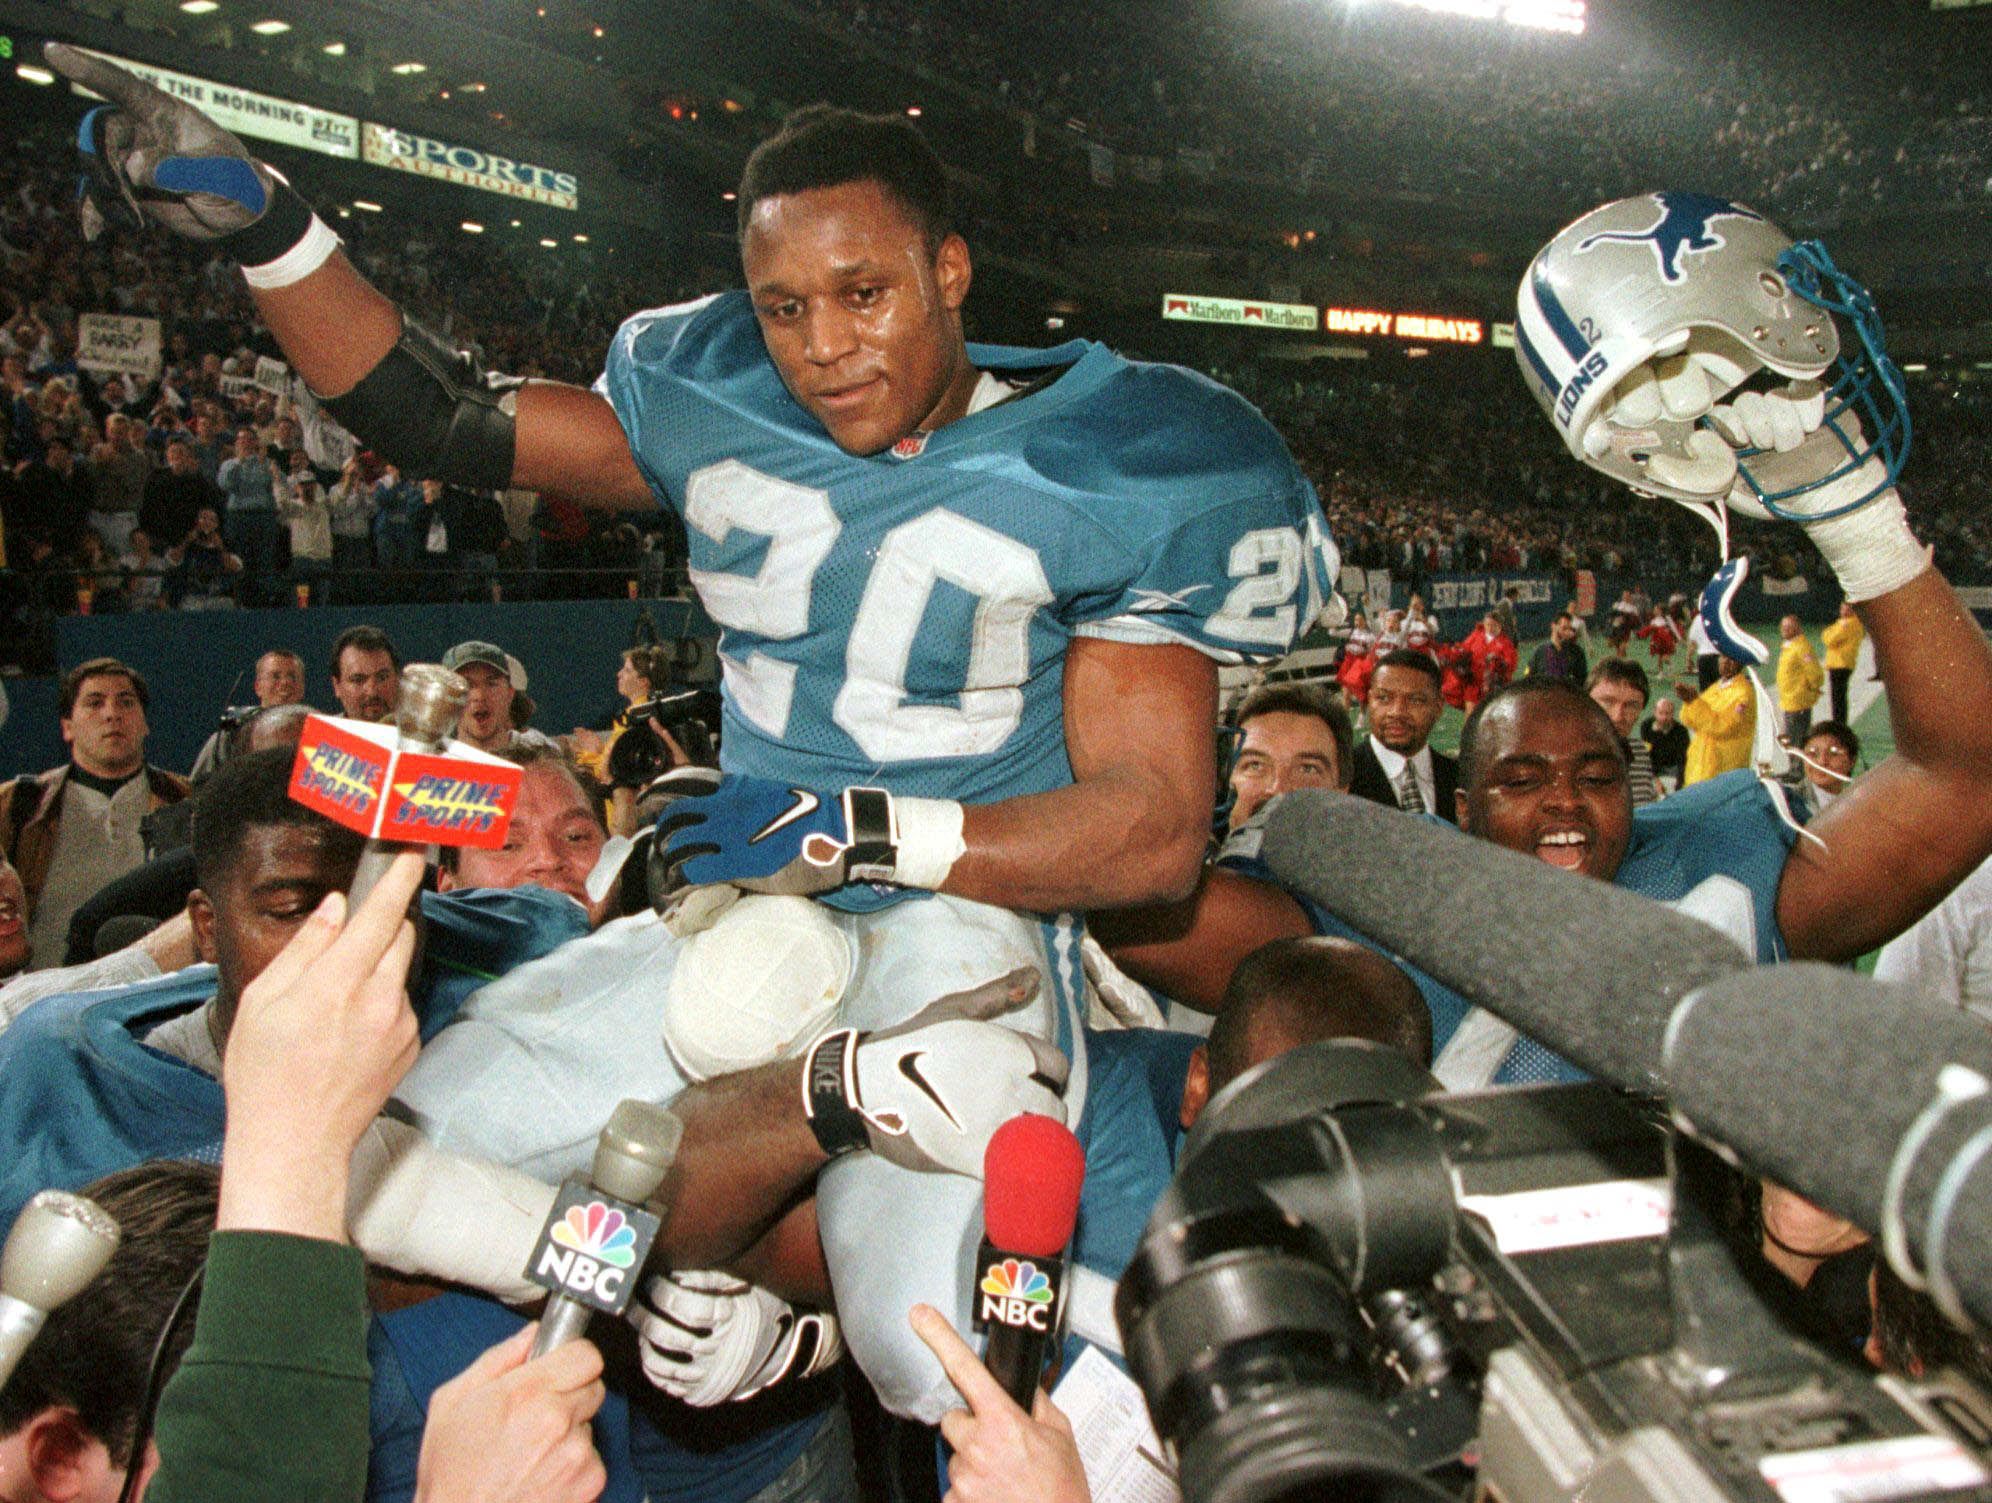 NFL 100: At No. 27, Barry Sanders' big runs stunned even his Lions